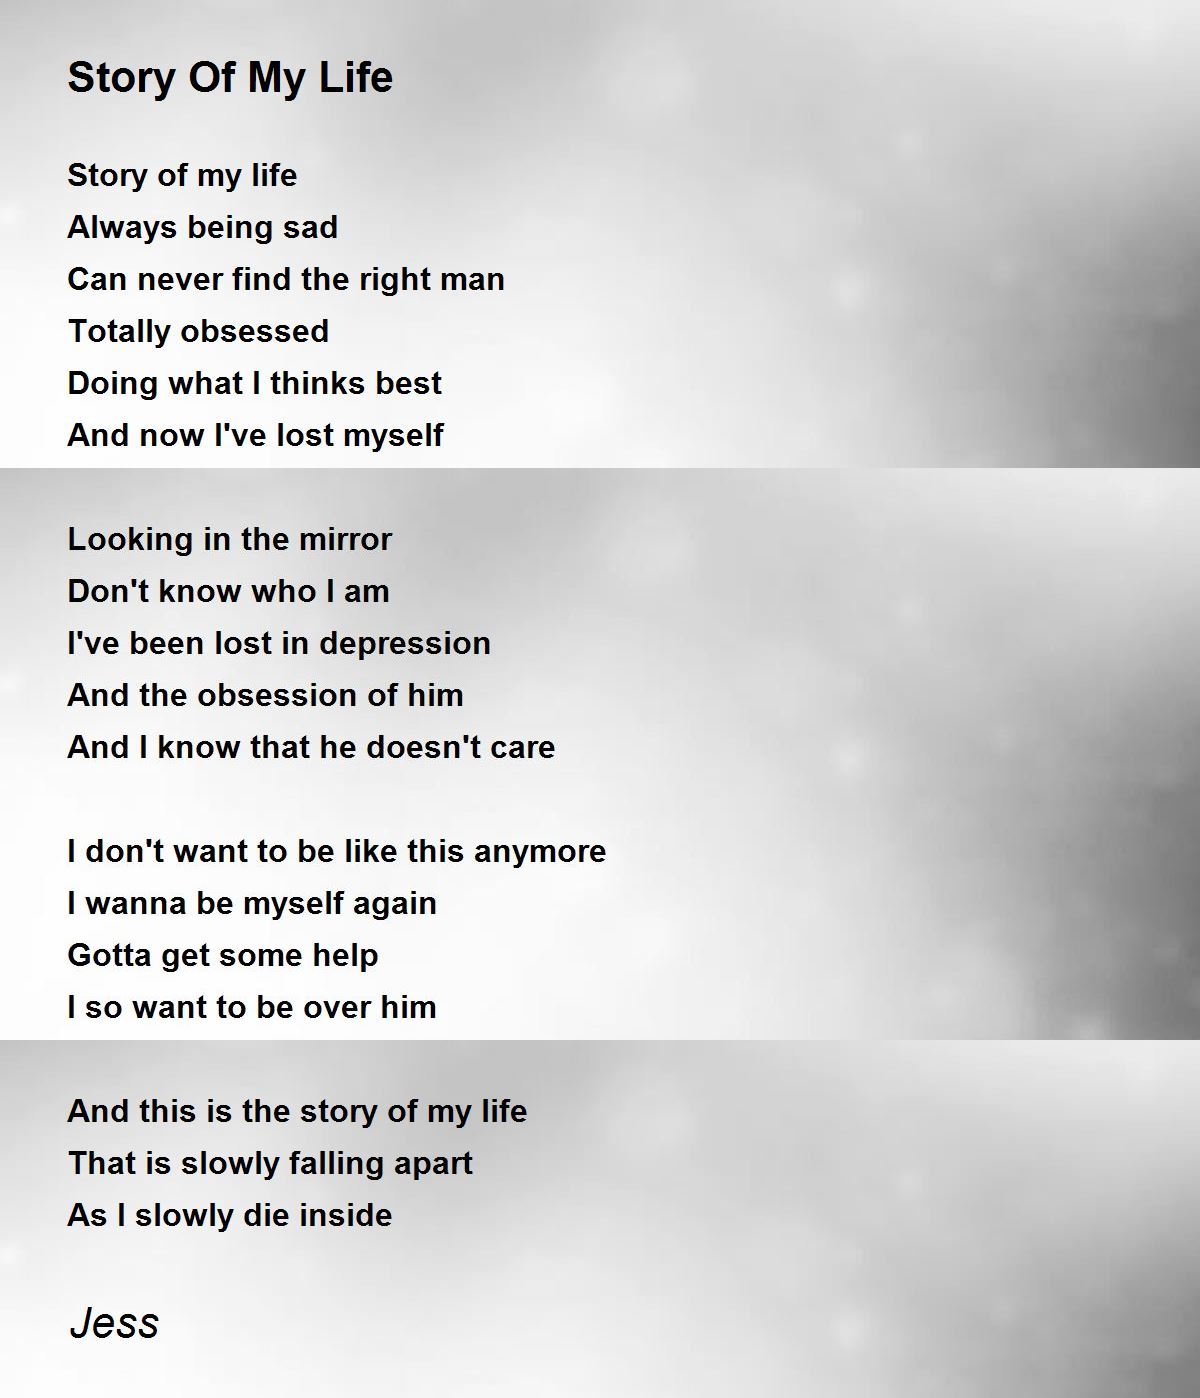 Story Of My Life - Story Of My Life Poem by Jess